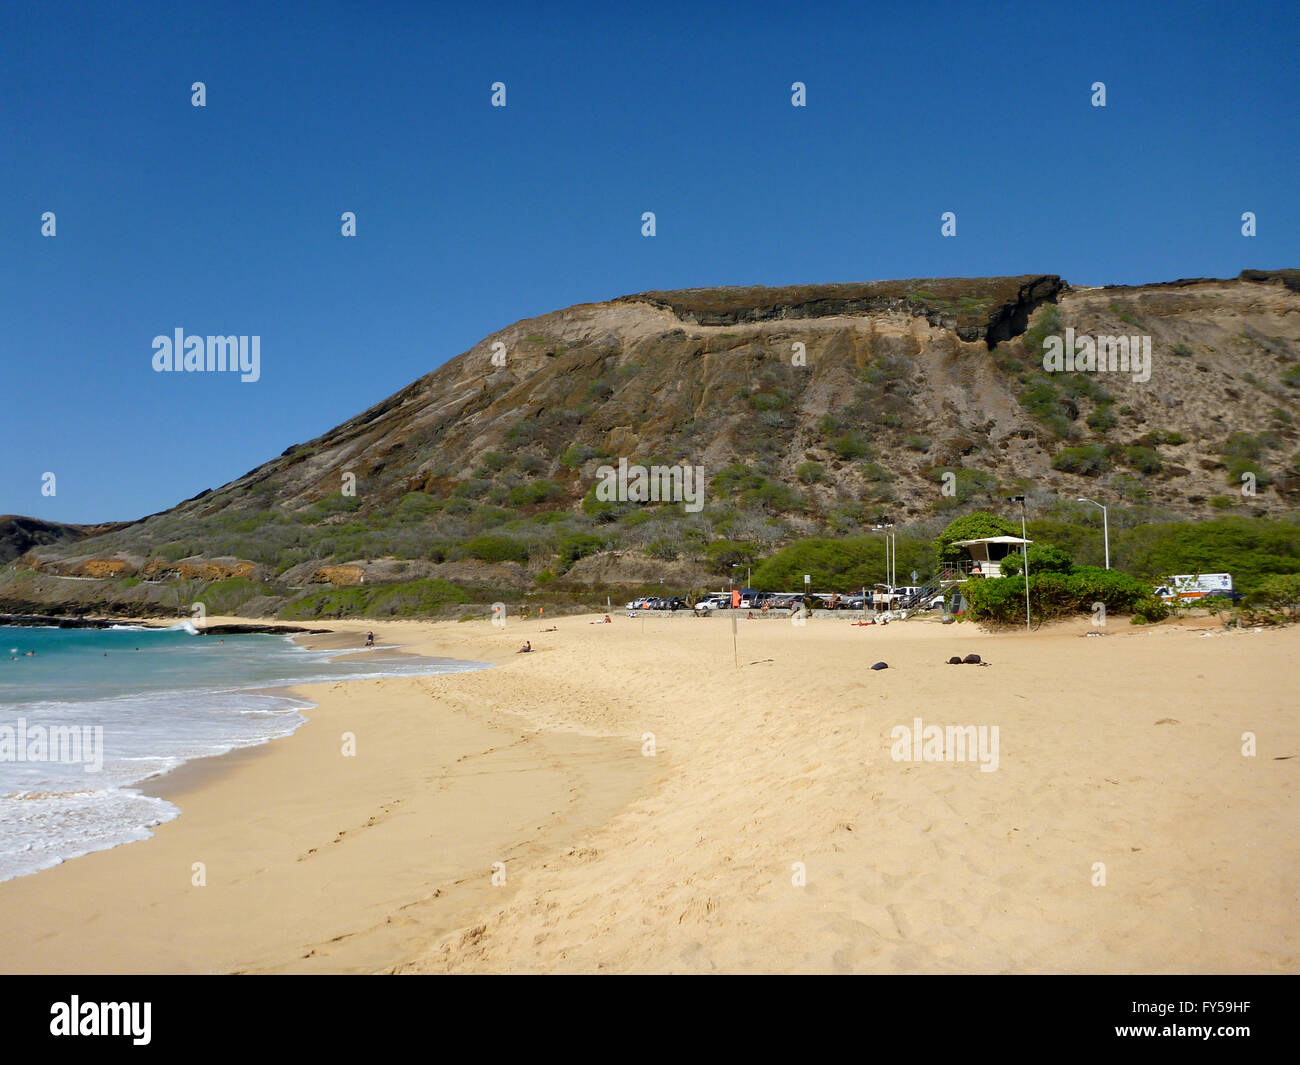 Waves Lap On Beach Of Sandy Beach Park With Koko Head Crater In The